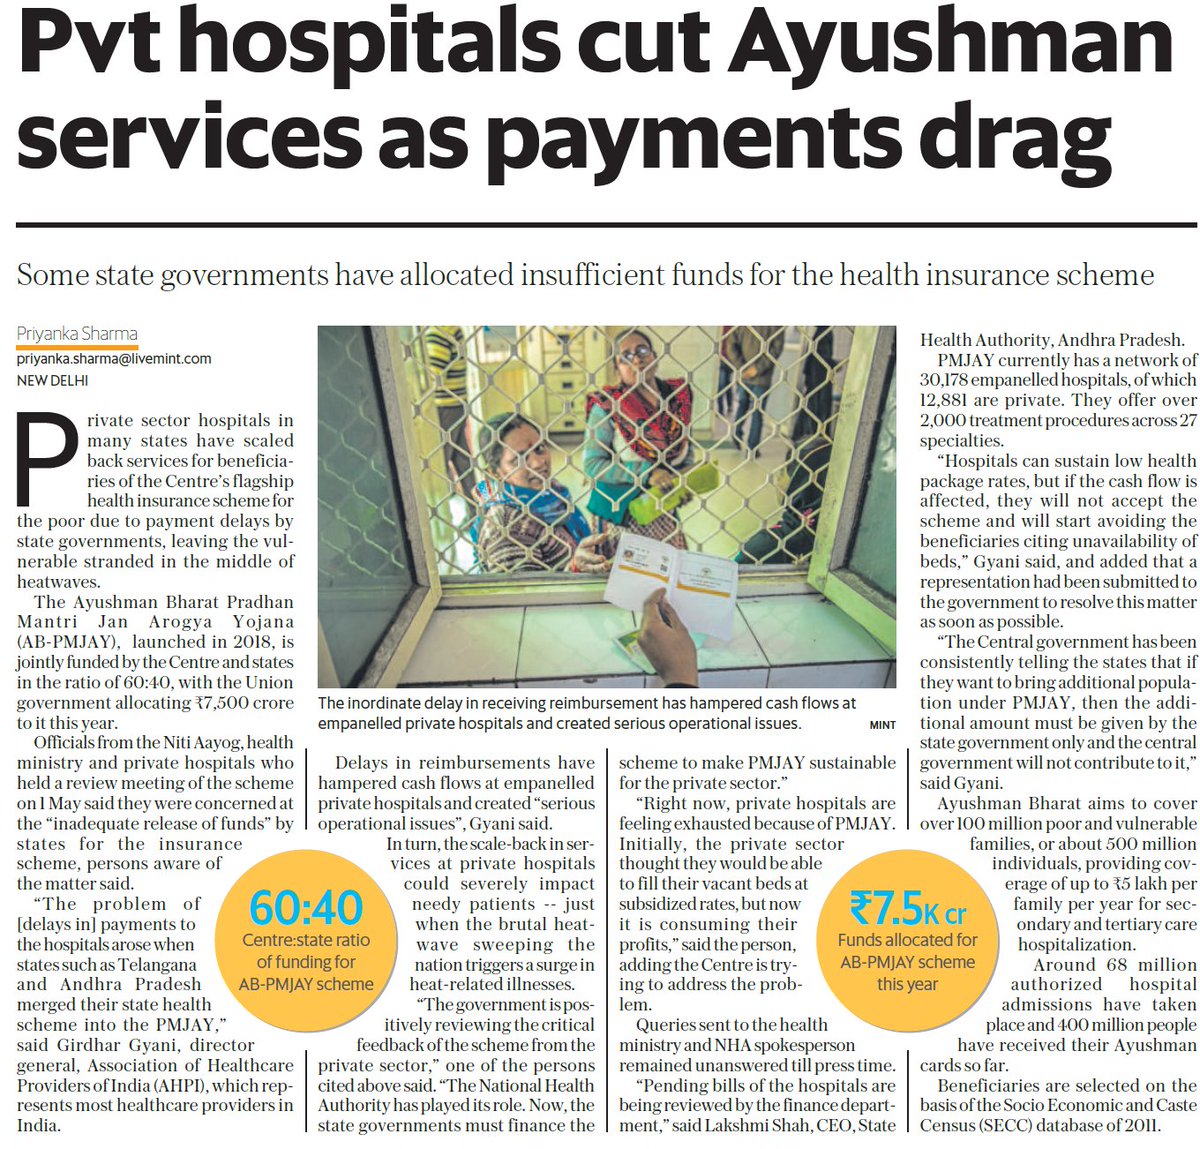 GoI  should dock central funds from states that are holding up Ayushman Bharat payments. Time and again feckless states have held good policymaking to ransom.